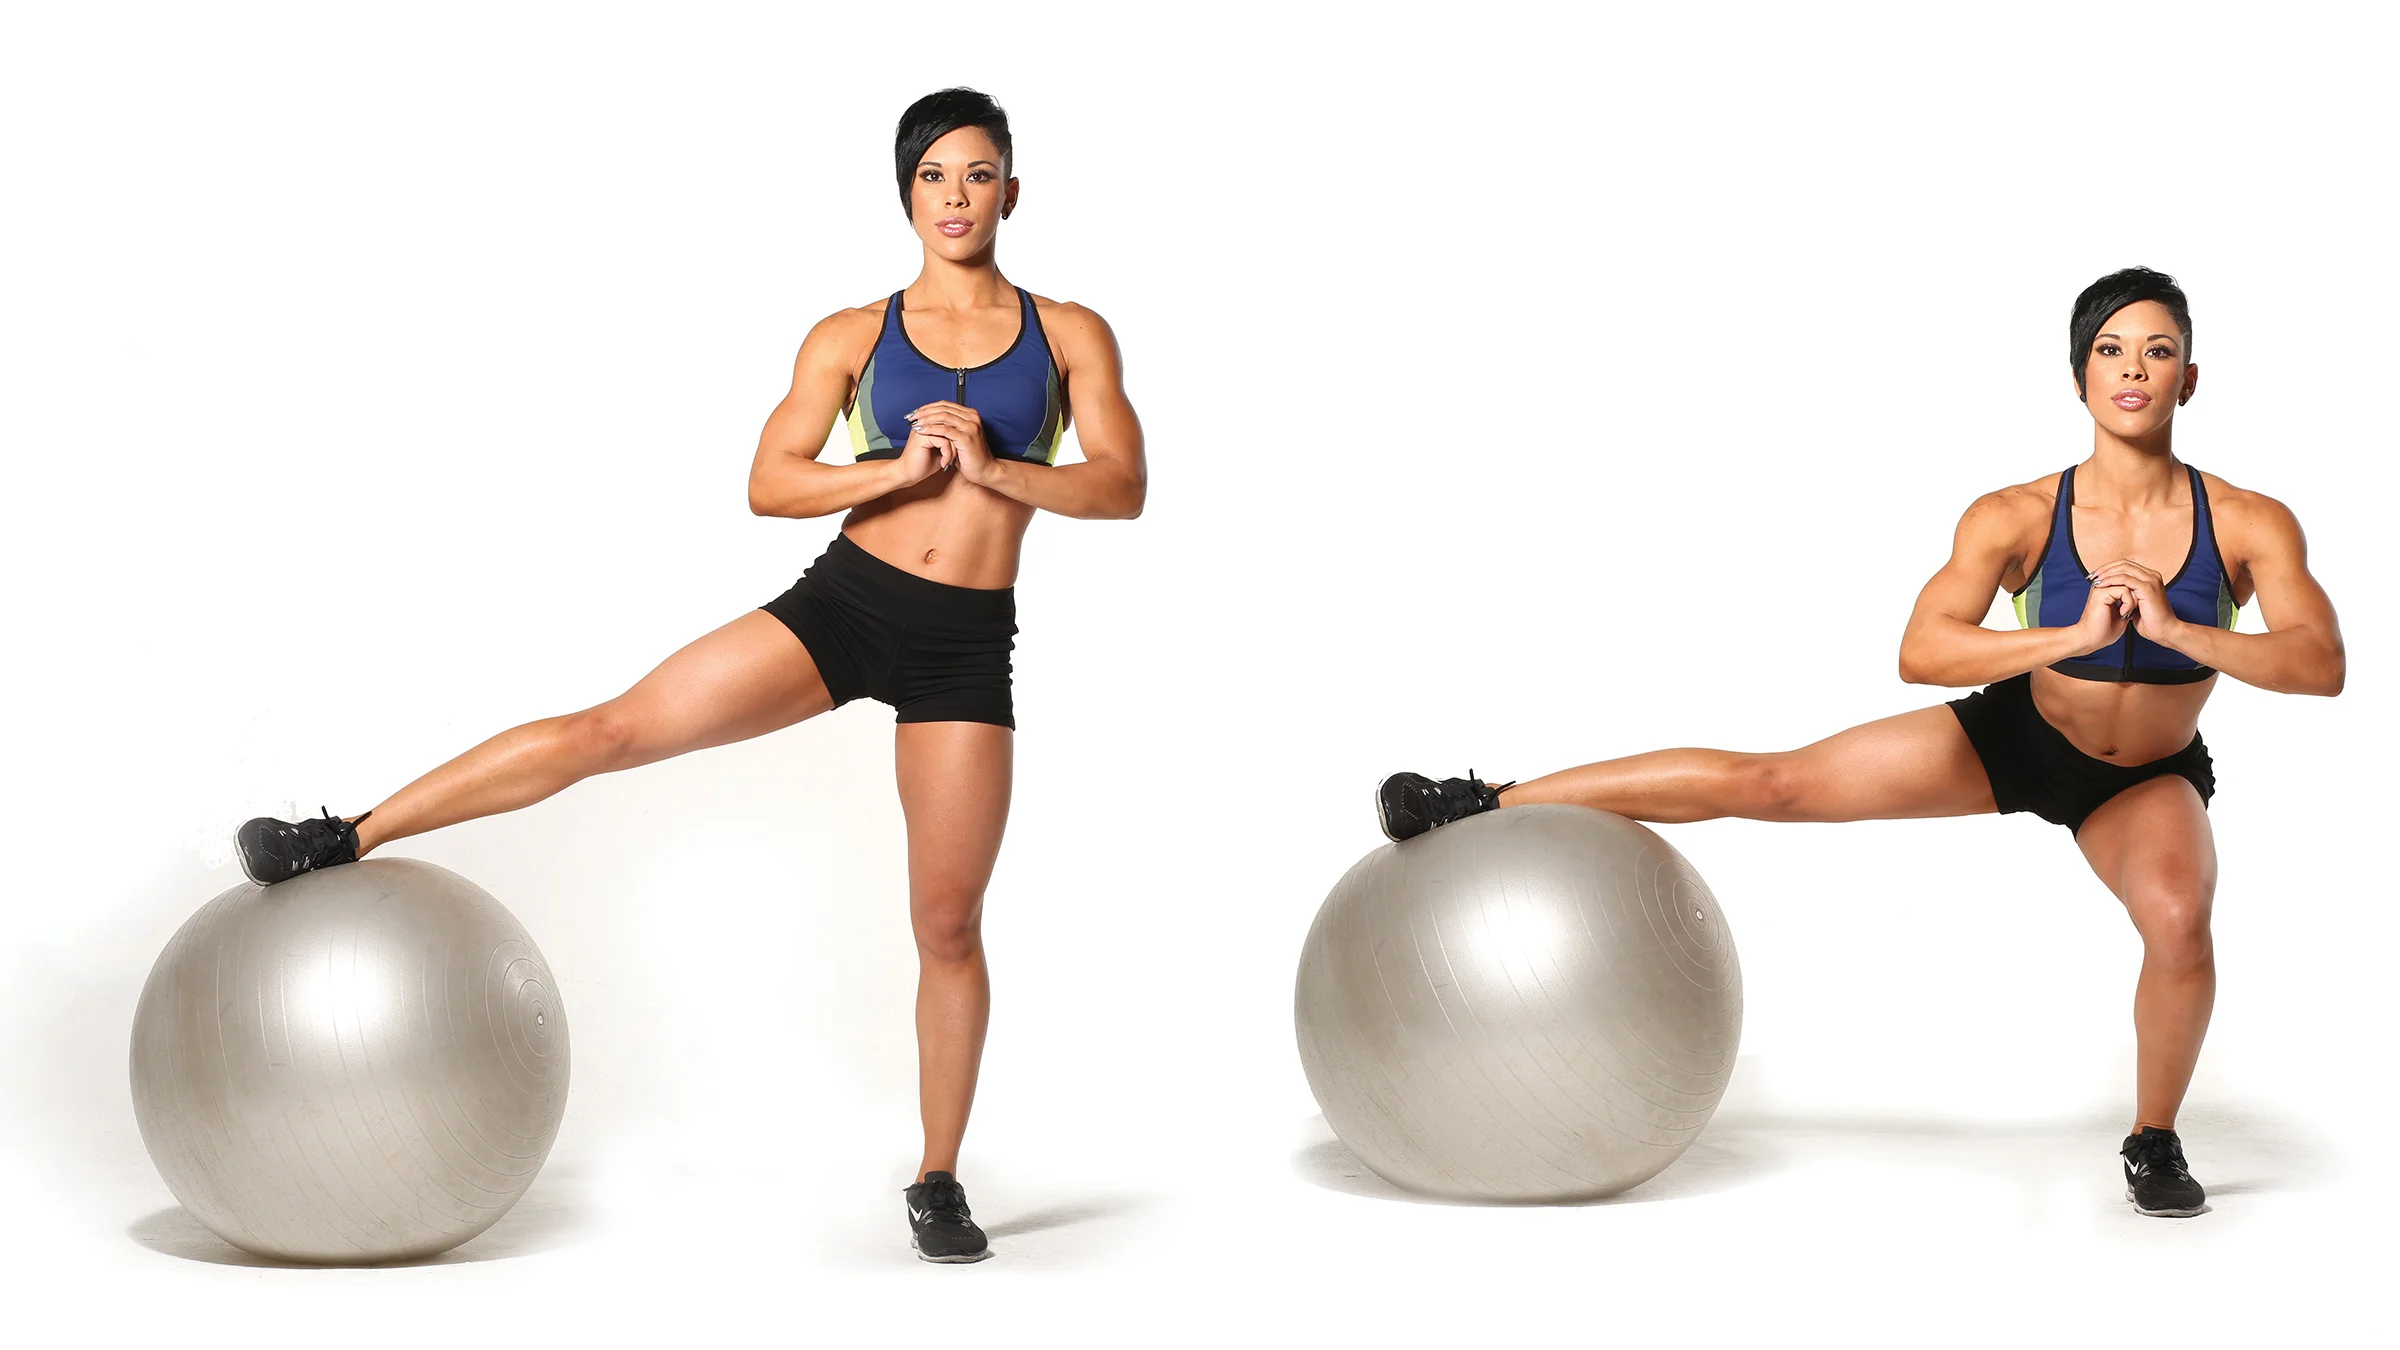 Do You Have the Balls? Do the Fitness Ball Workout